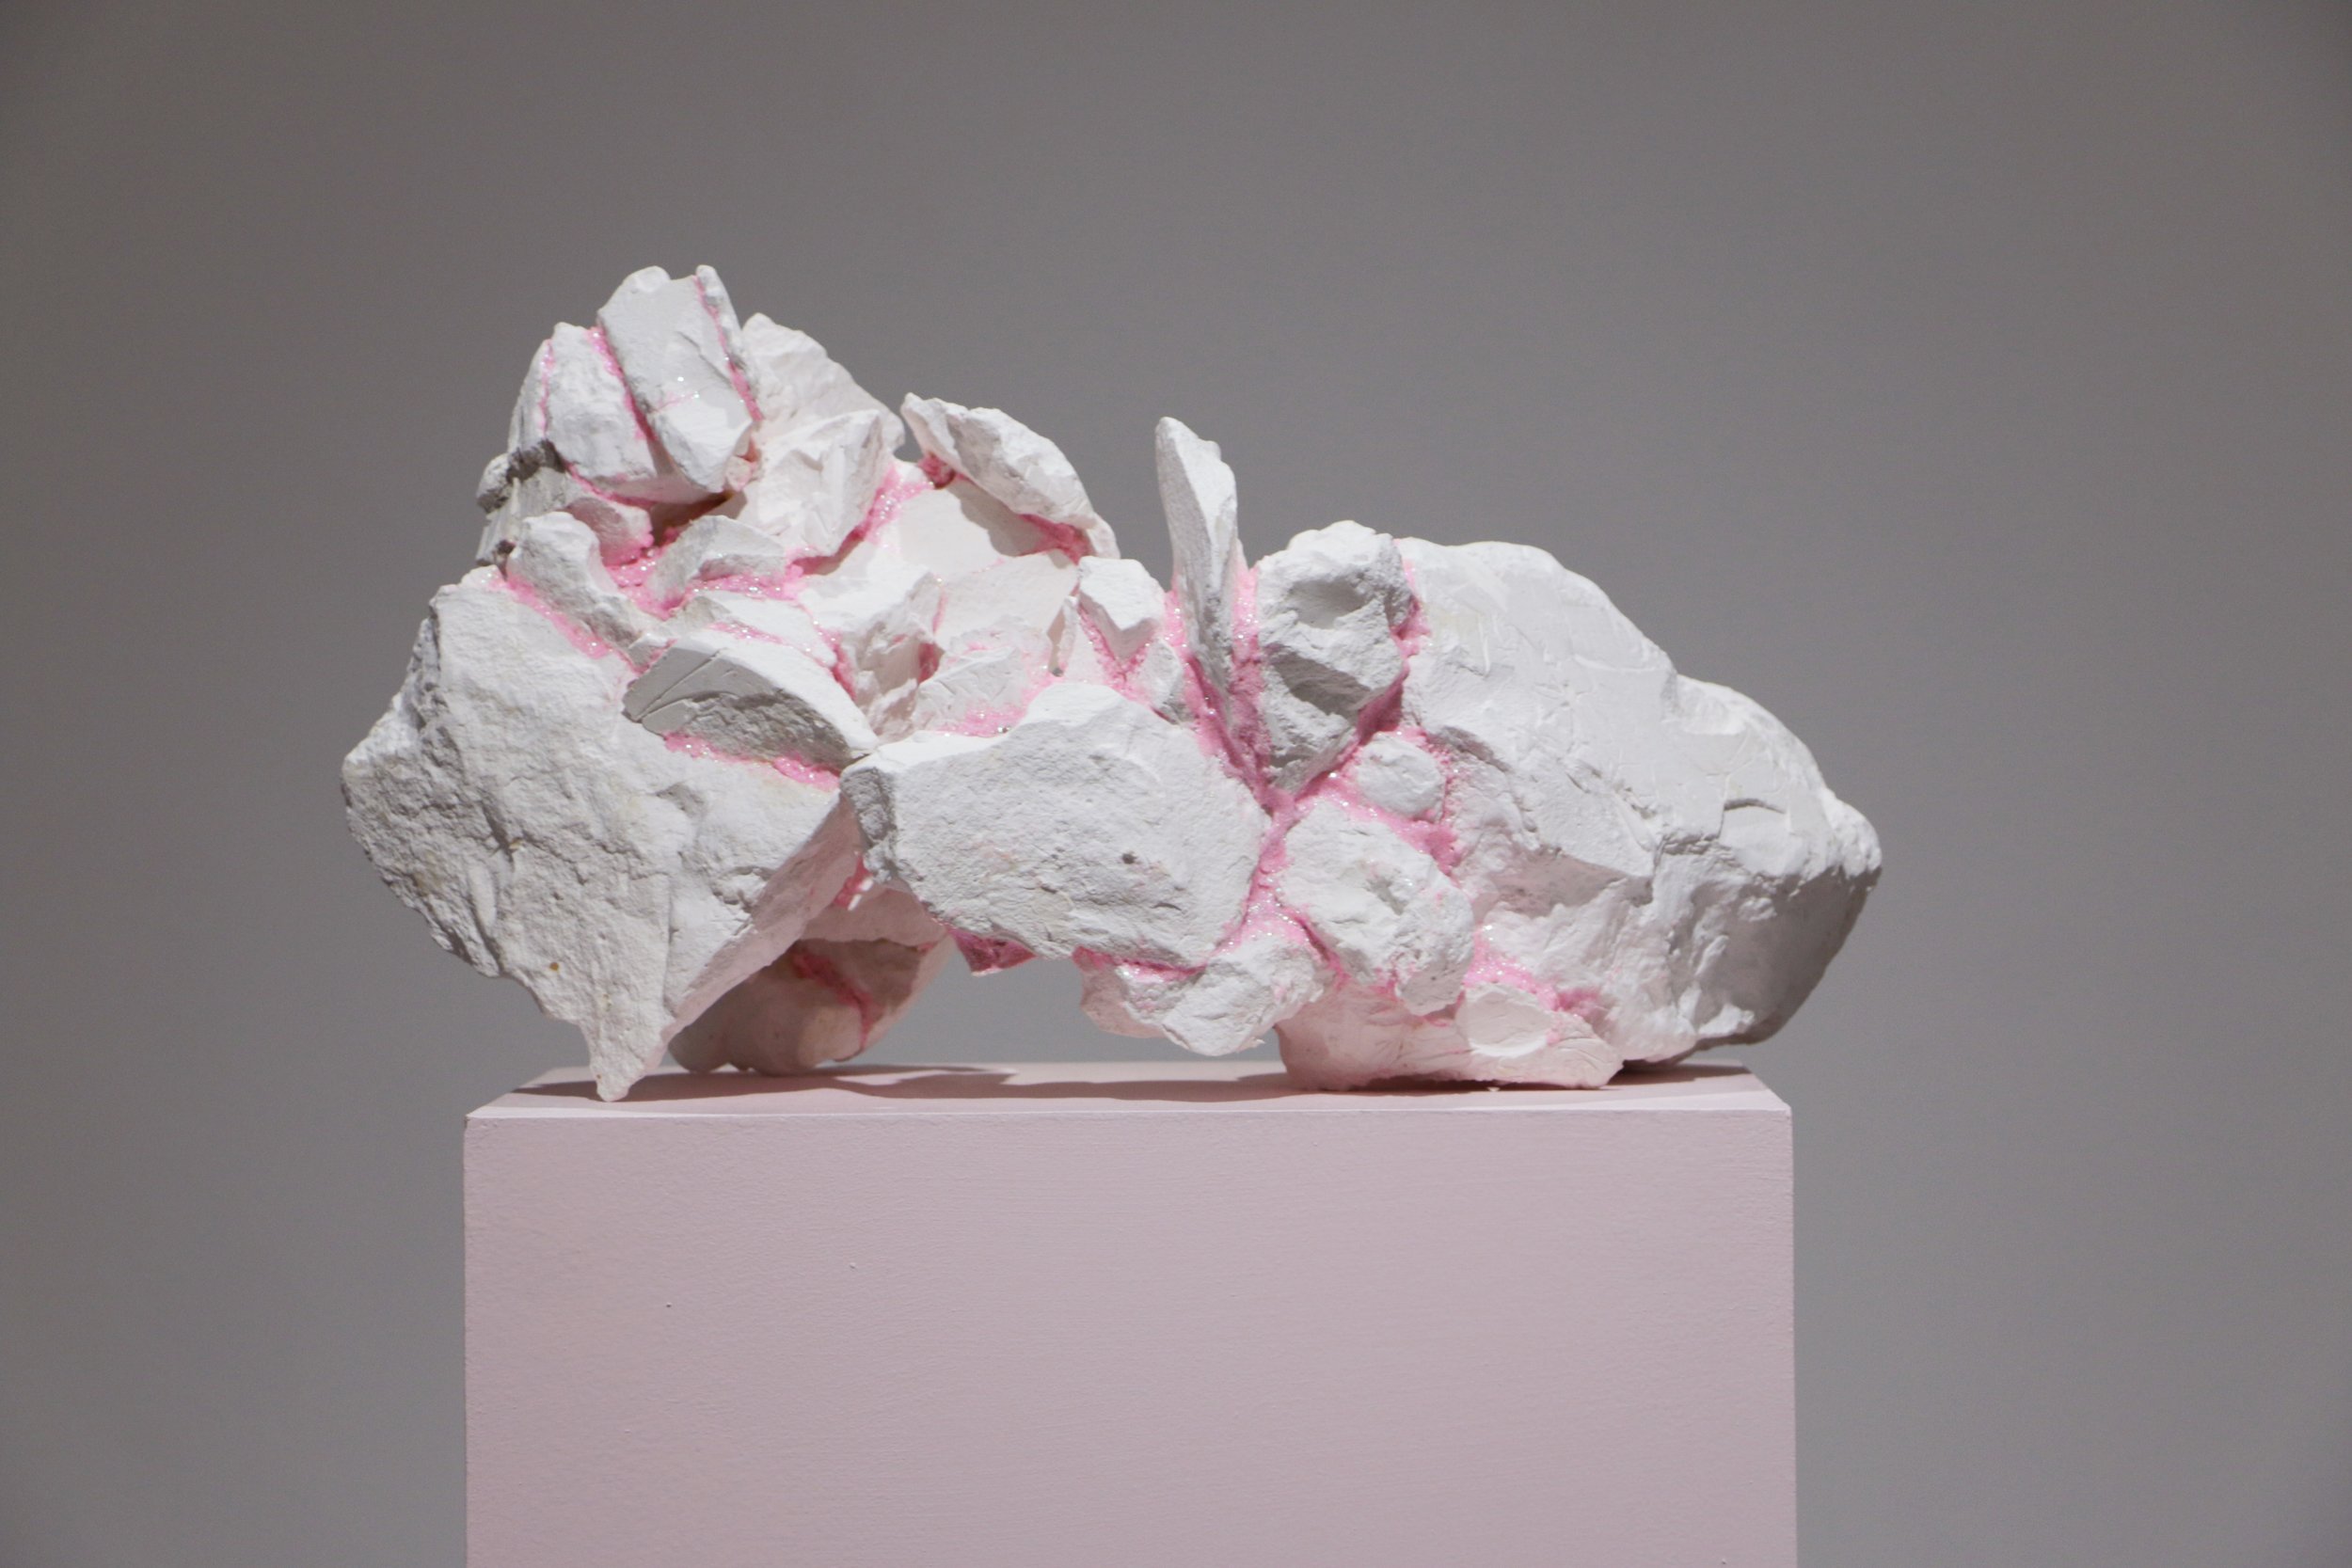   The Break-Up , 2018, Plaster and Pink Glitter Glue   Wabi-sabi  (n.) The discovery of beauty in imperfection; the acceptance of cycle of life and death.  (n.) A Japanese aesthetic. A gold flux (material) that is used to bond broken ceramic pieces t